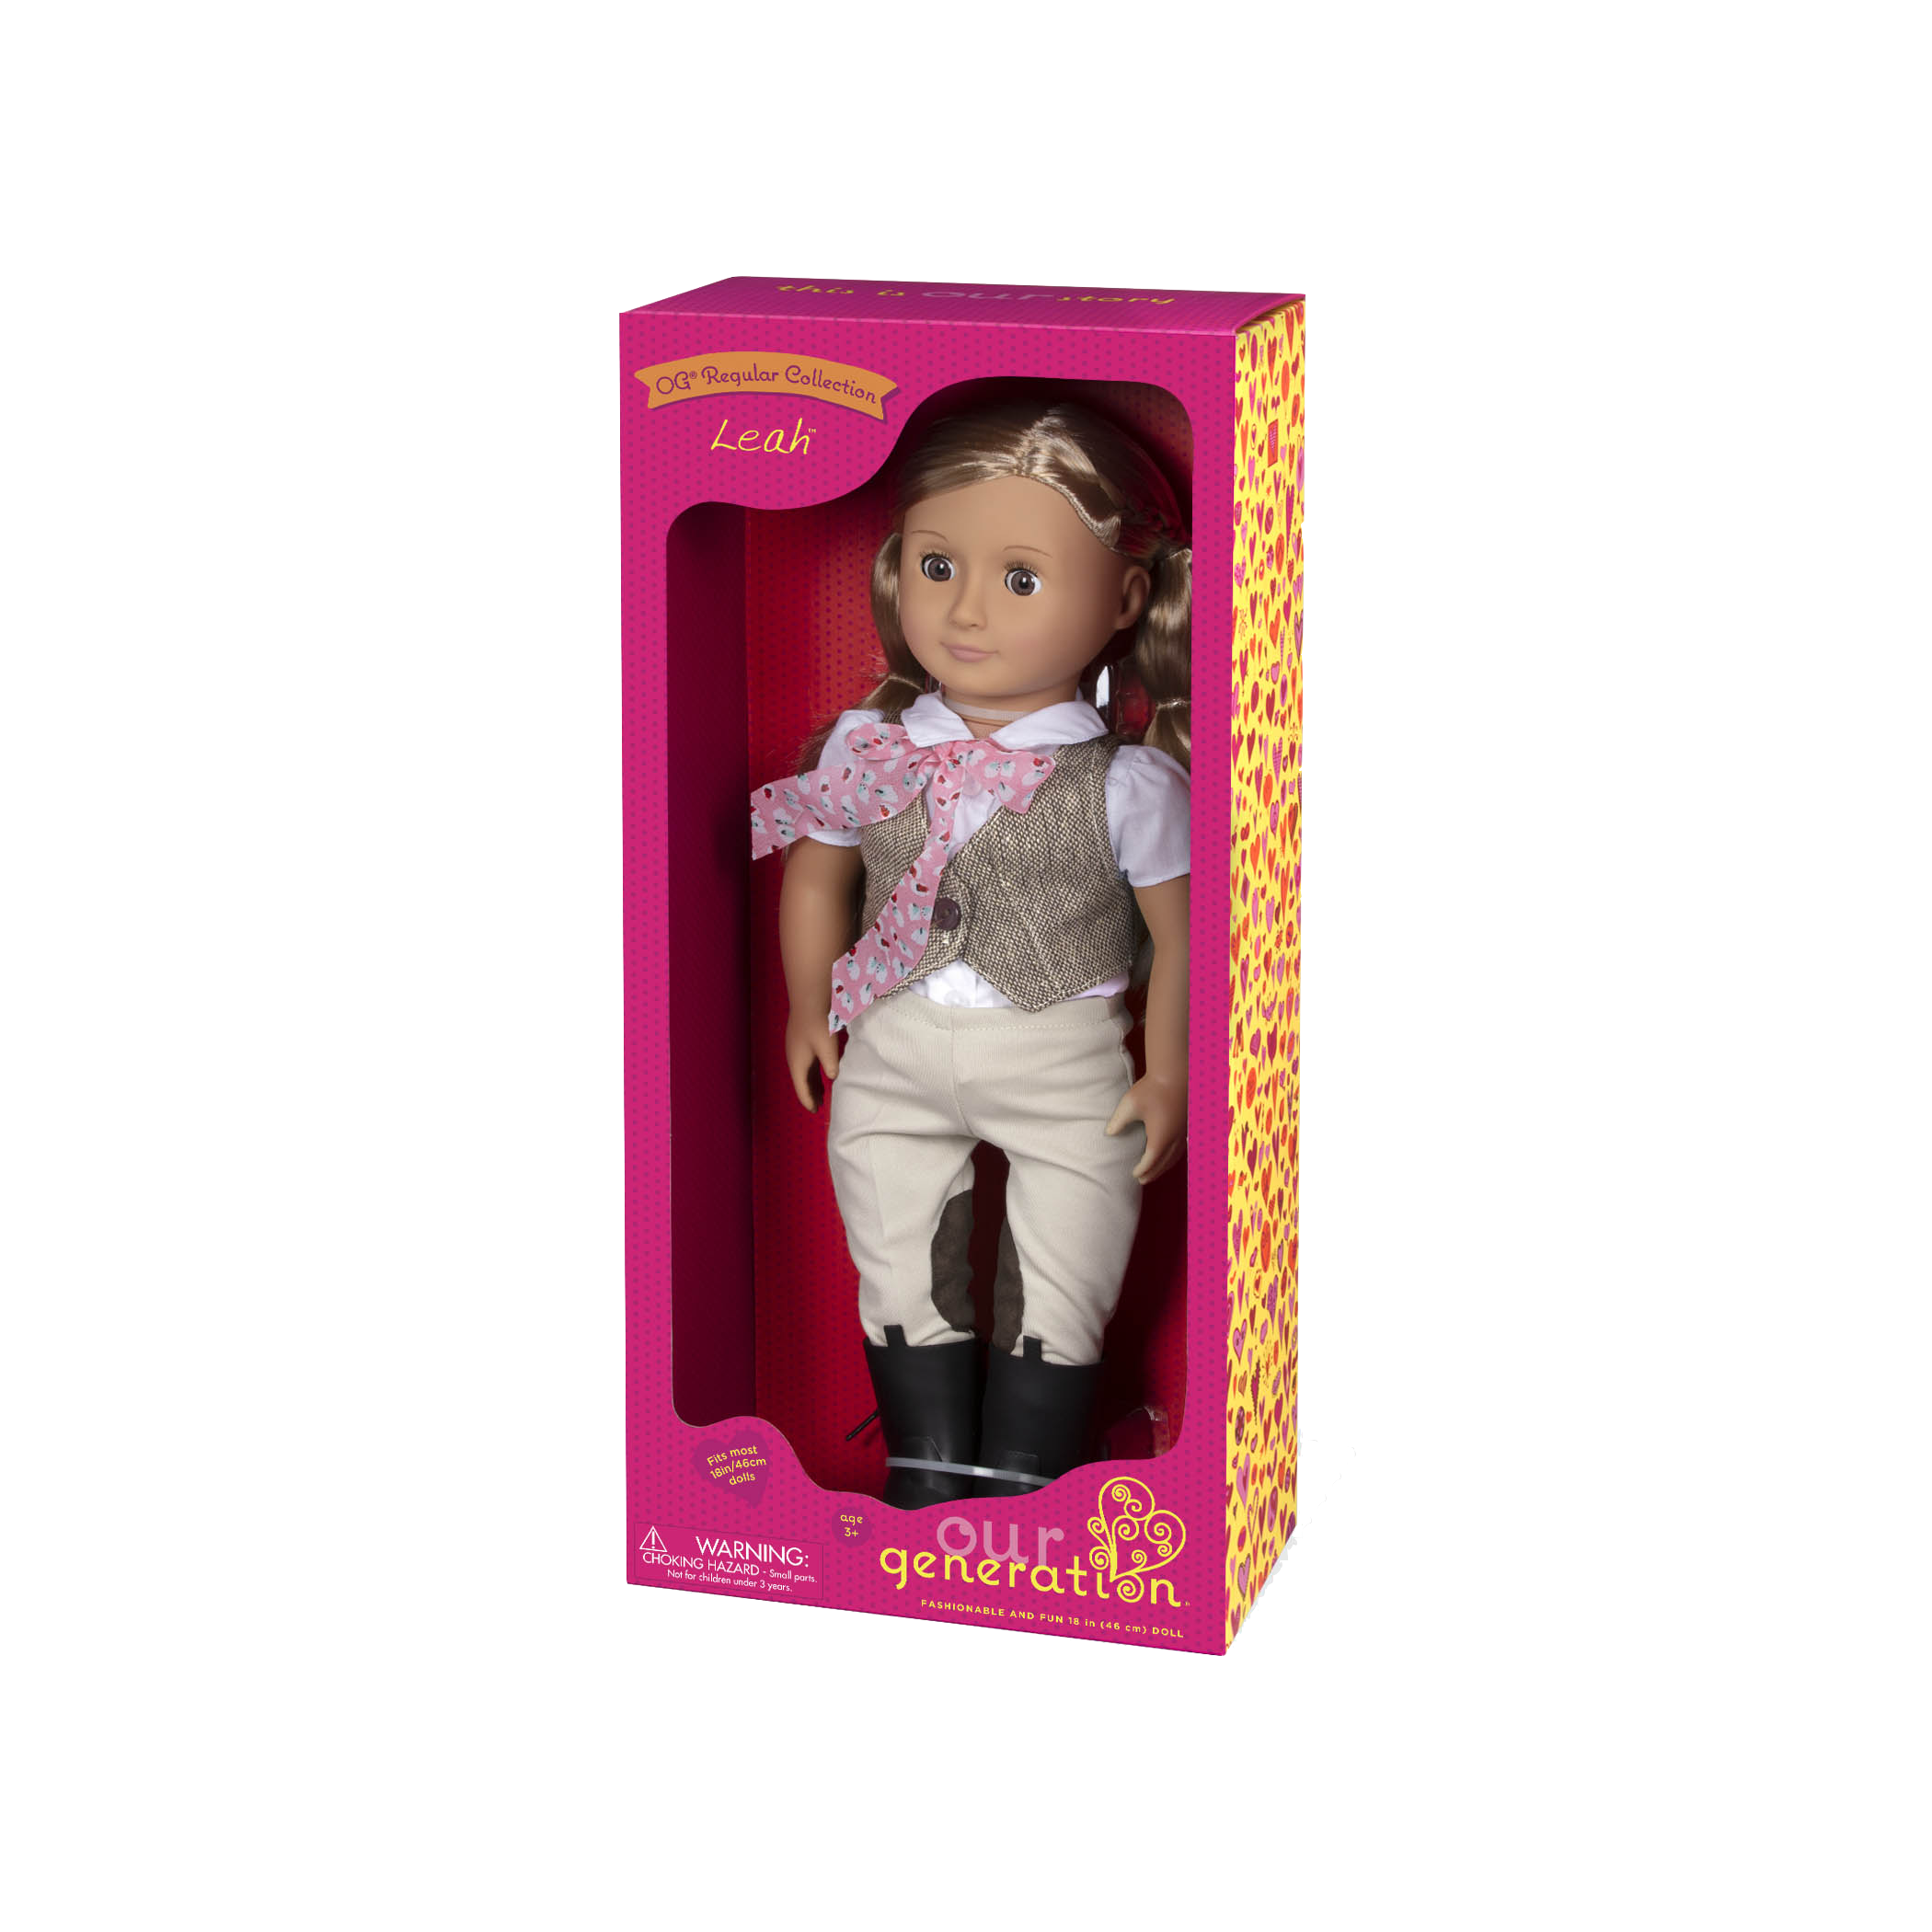 Our Generation Doll by Battat Leah 18 Regular Non-Posable Equestrian Horse Riding Doll for Ages 3 & Up 